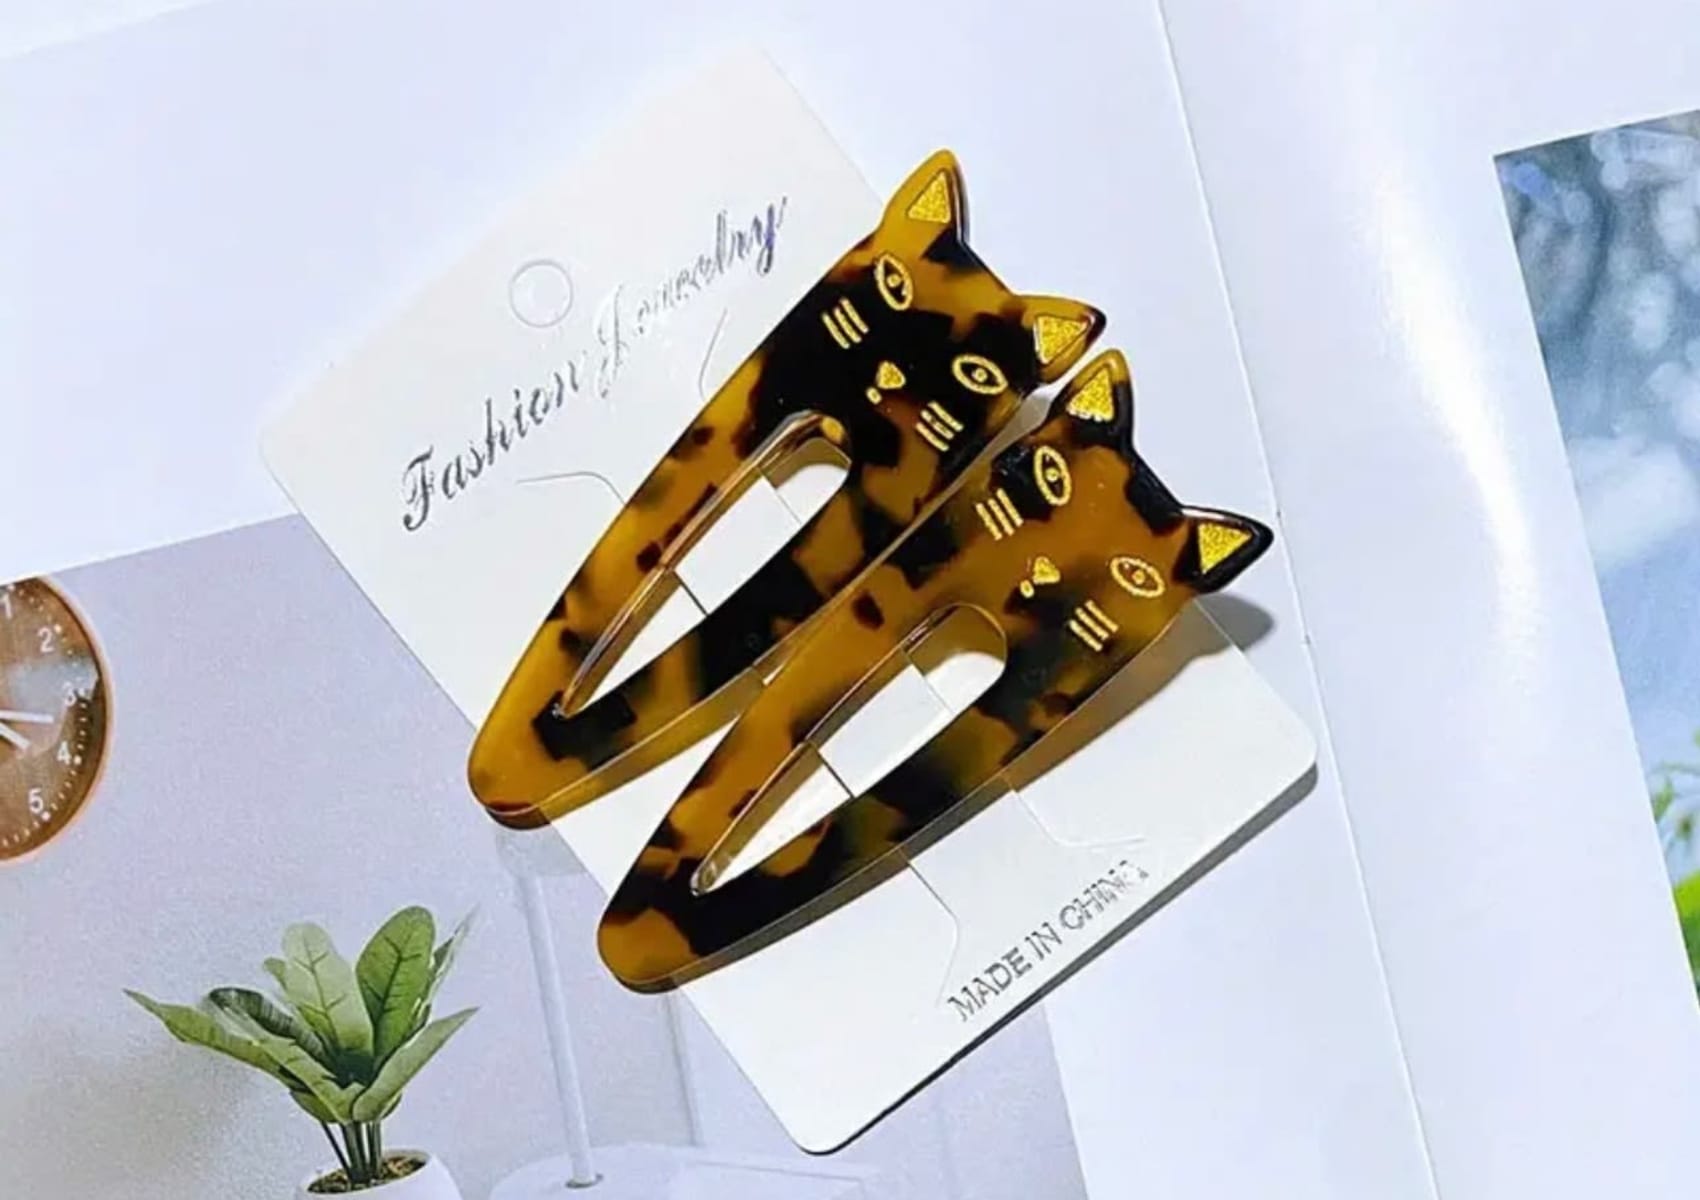 Pair of tortoiseshell hair clips with cat faces